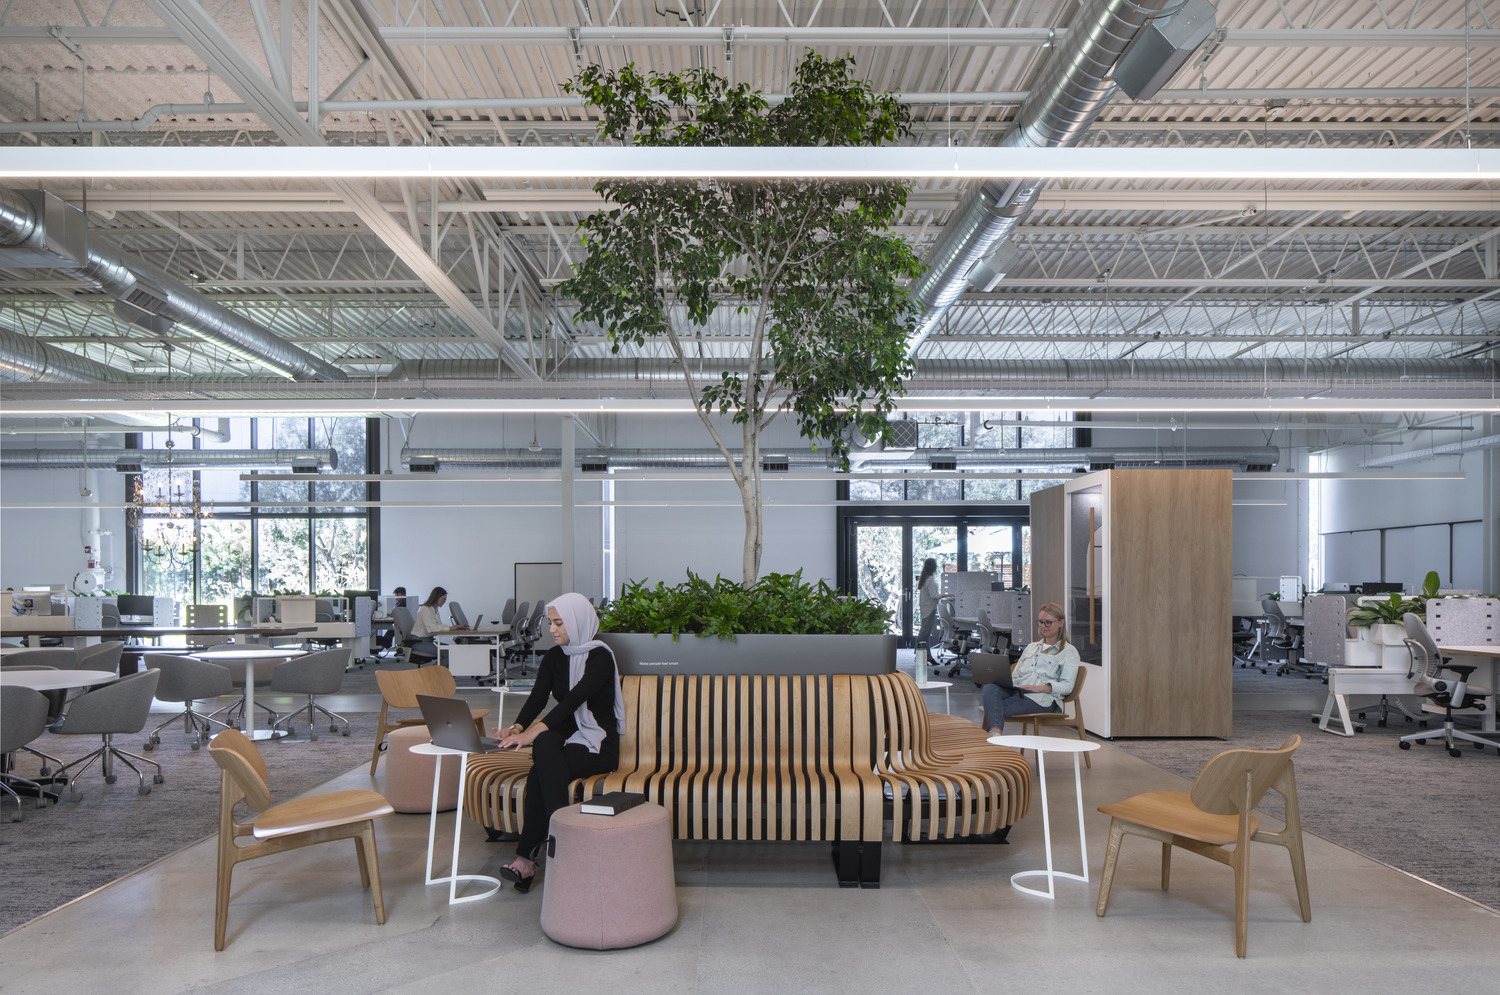 Modern office space with employees at work and casual seating areas.